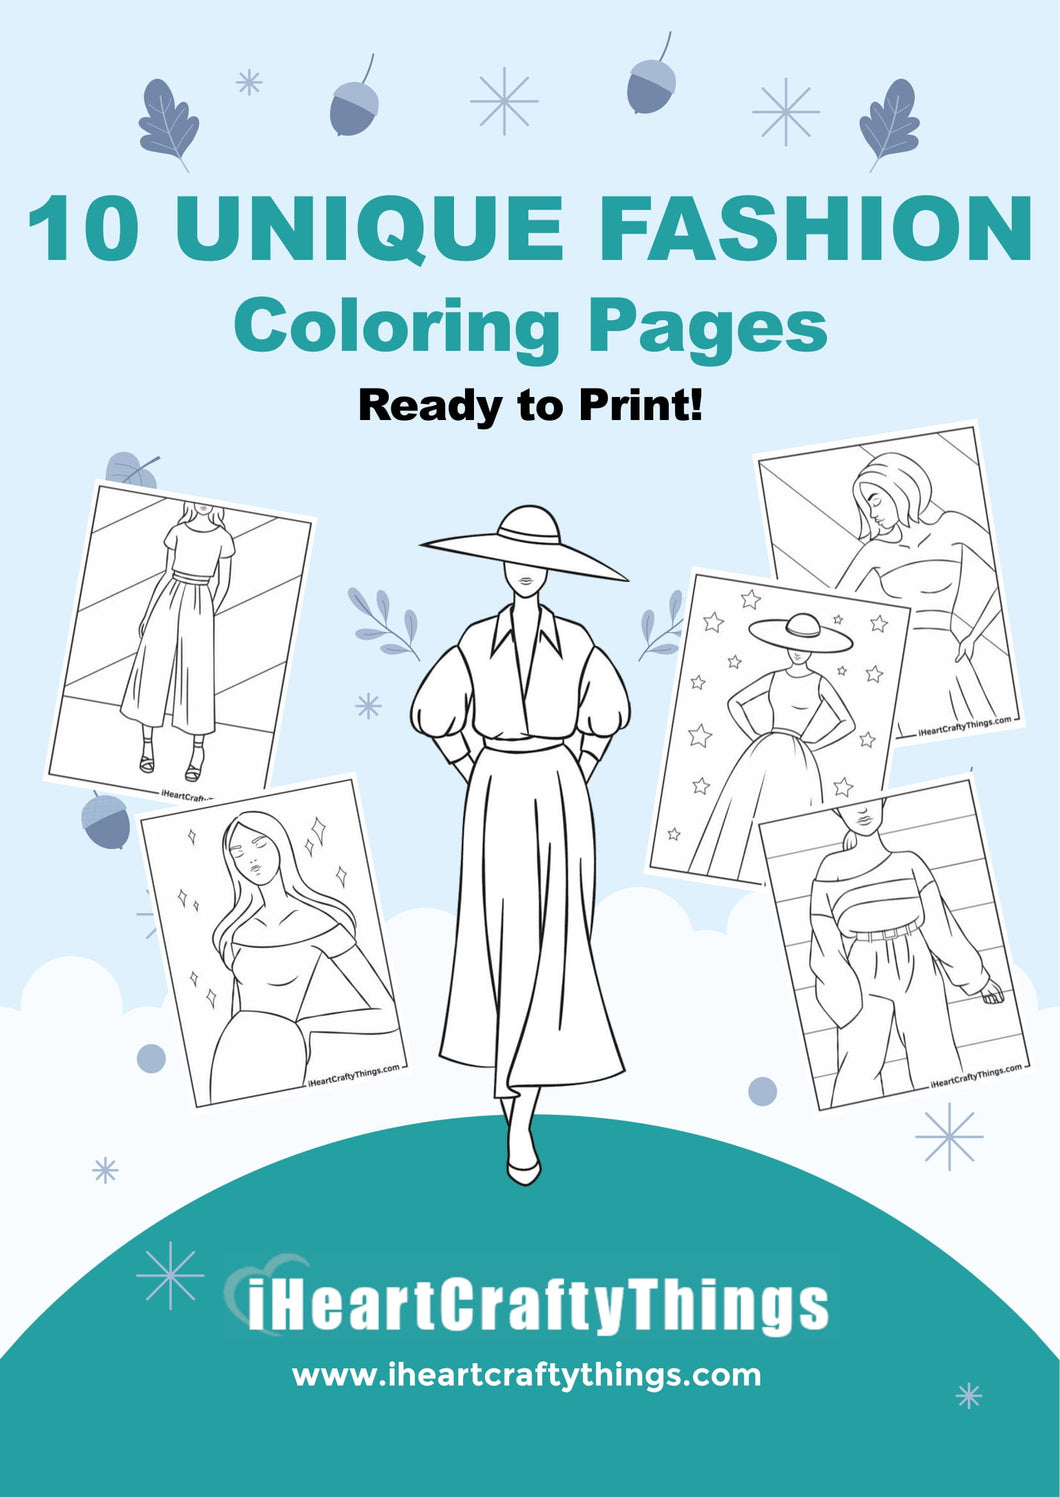 10 FASHION COLORING PAGES